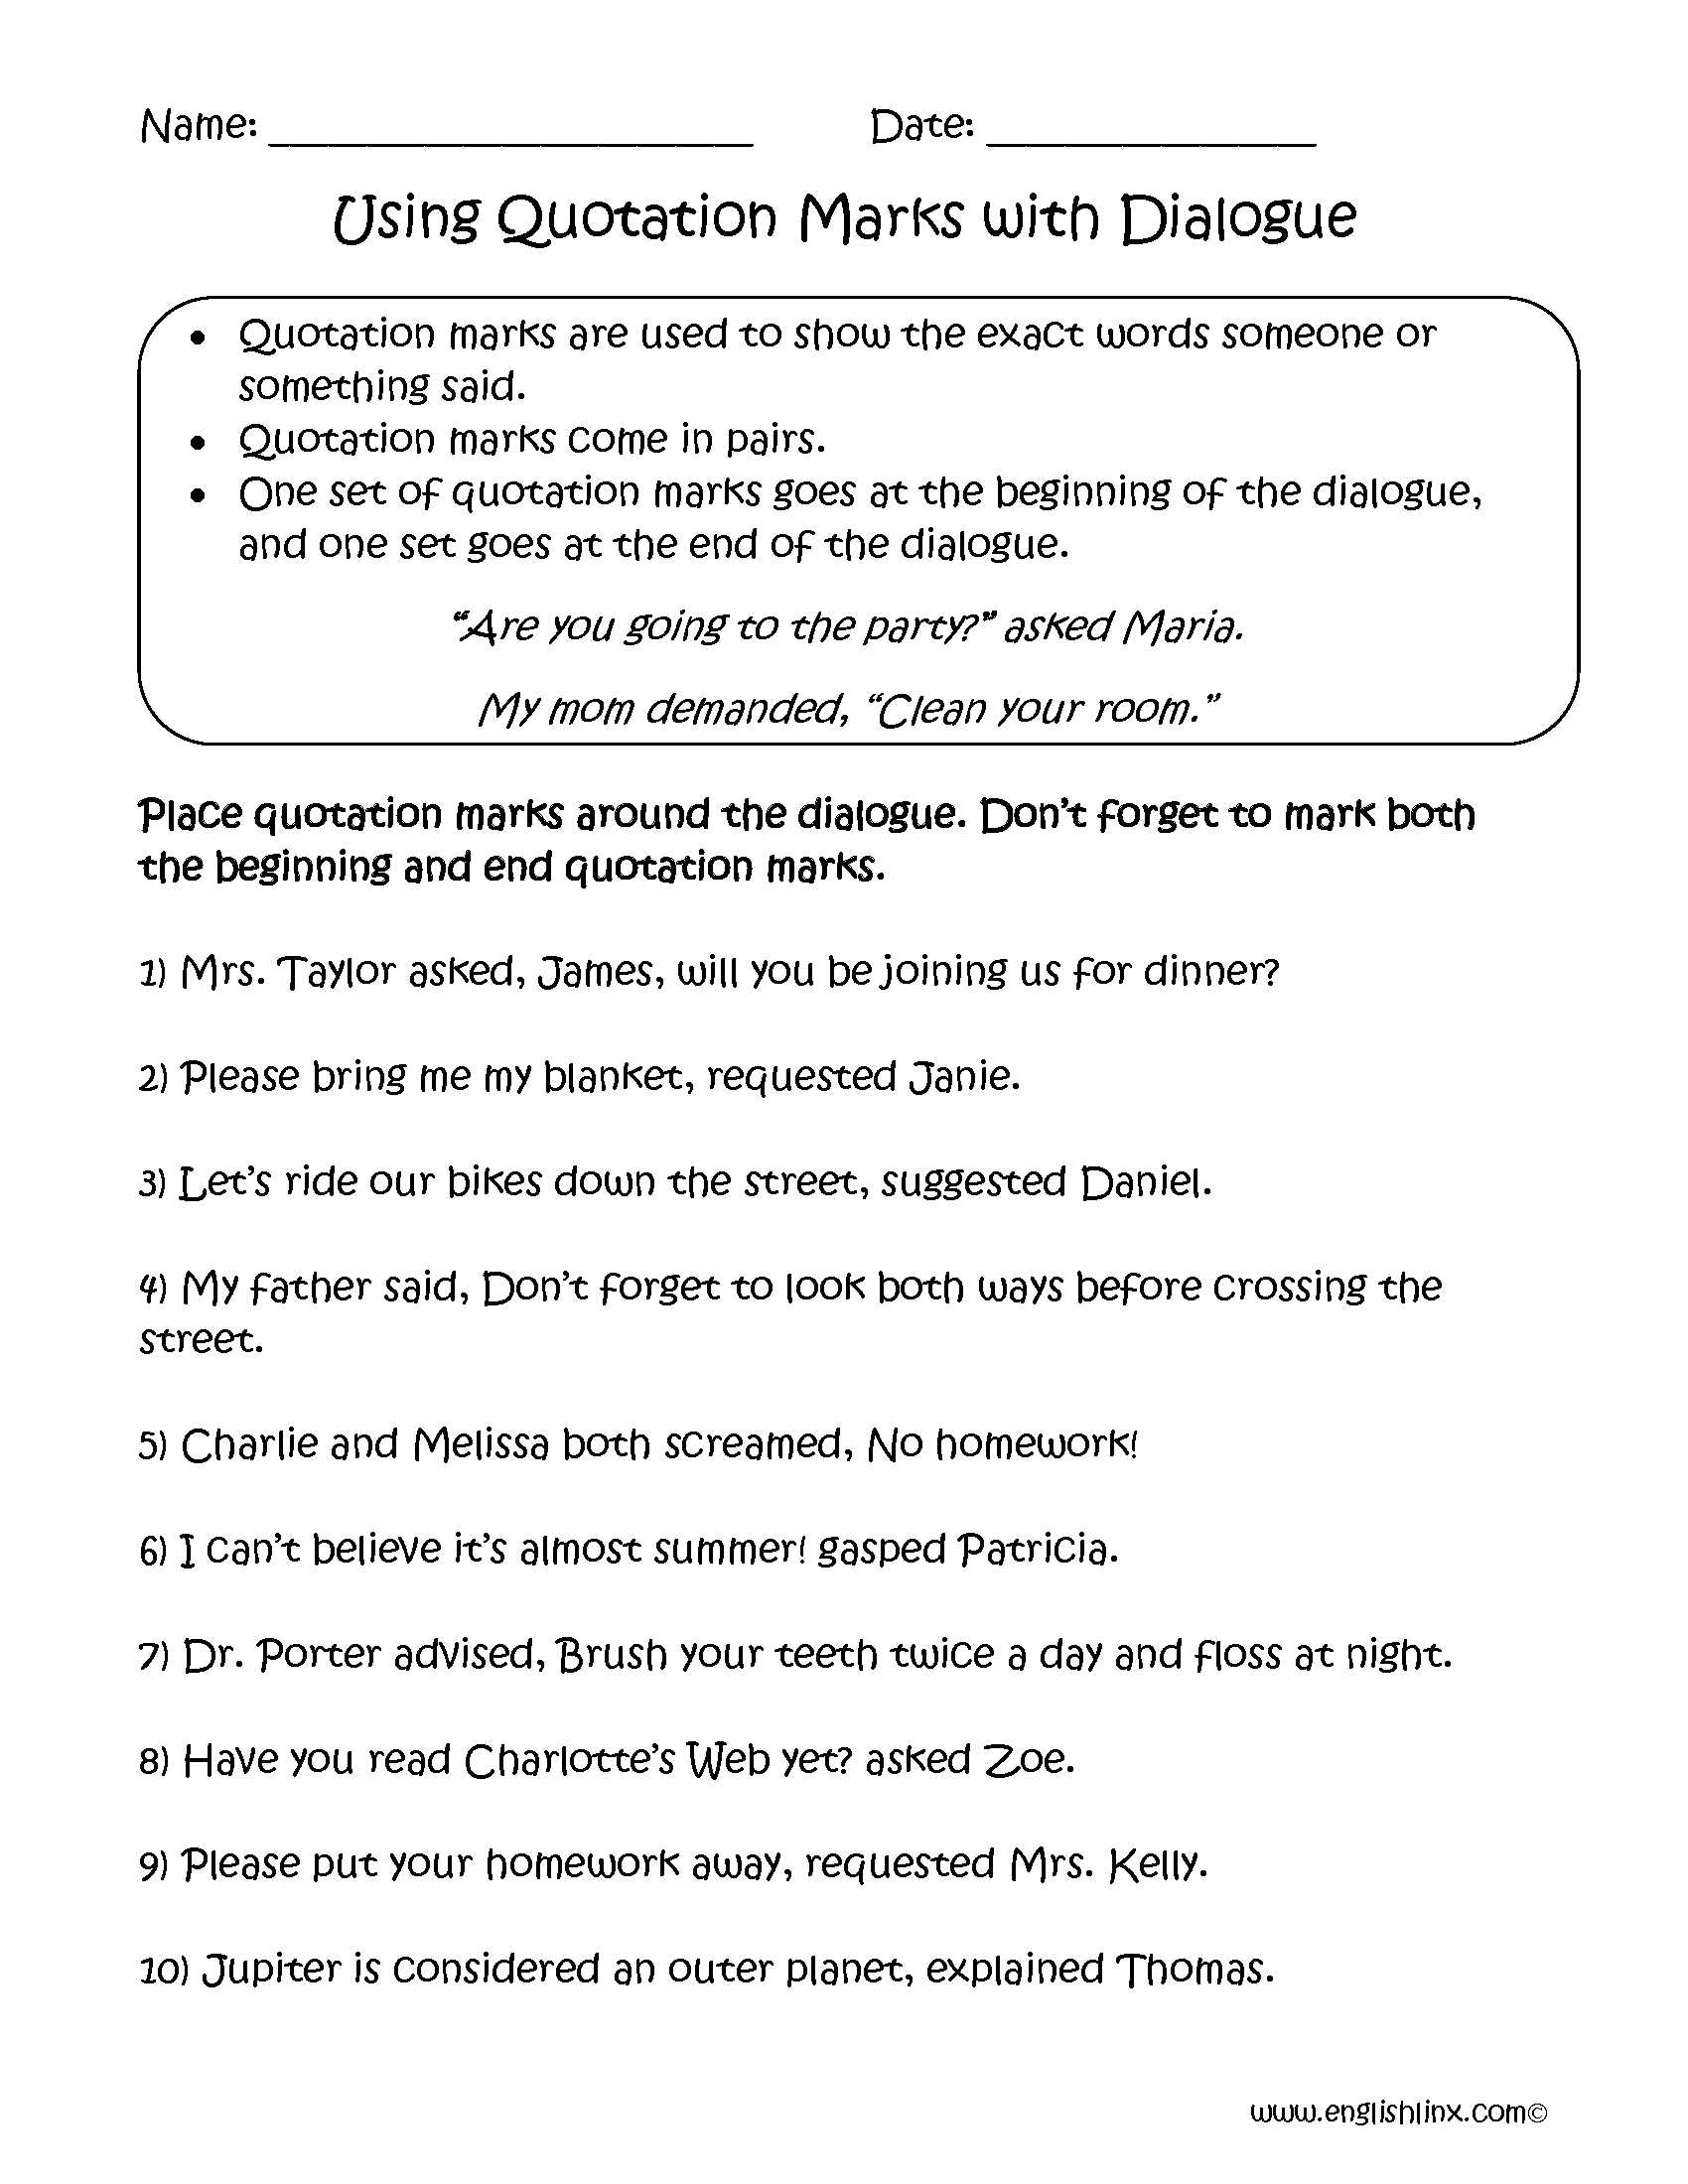 Adverb Practice Worksheets Along with Adding Quotation Marks to Dialogue Worksheet